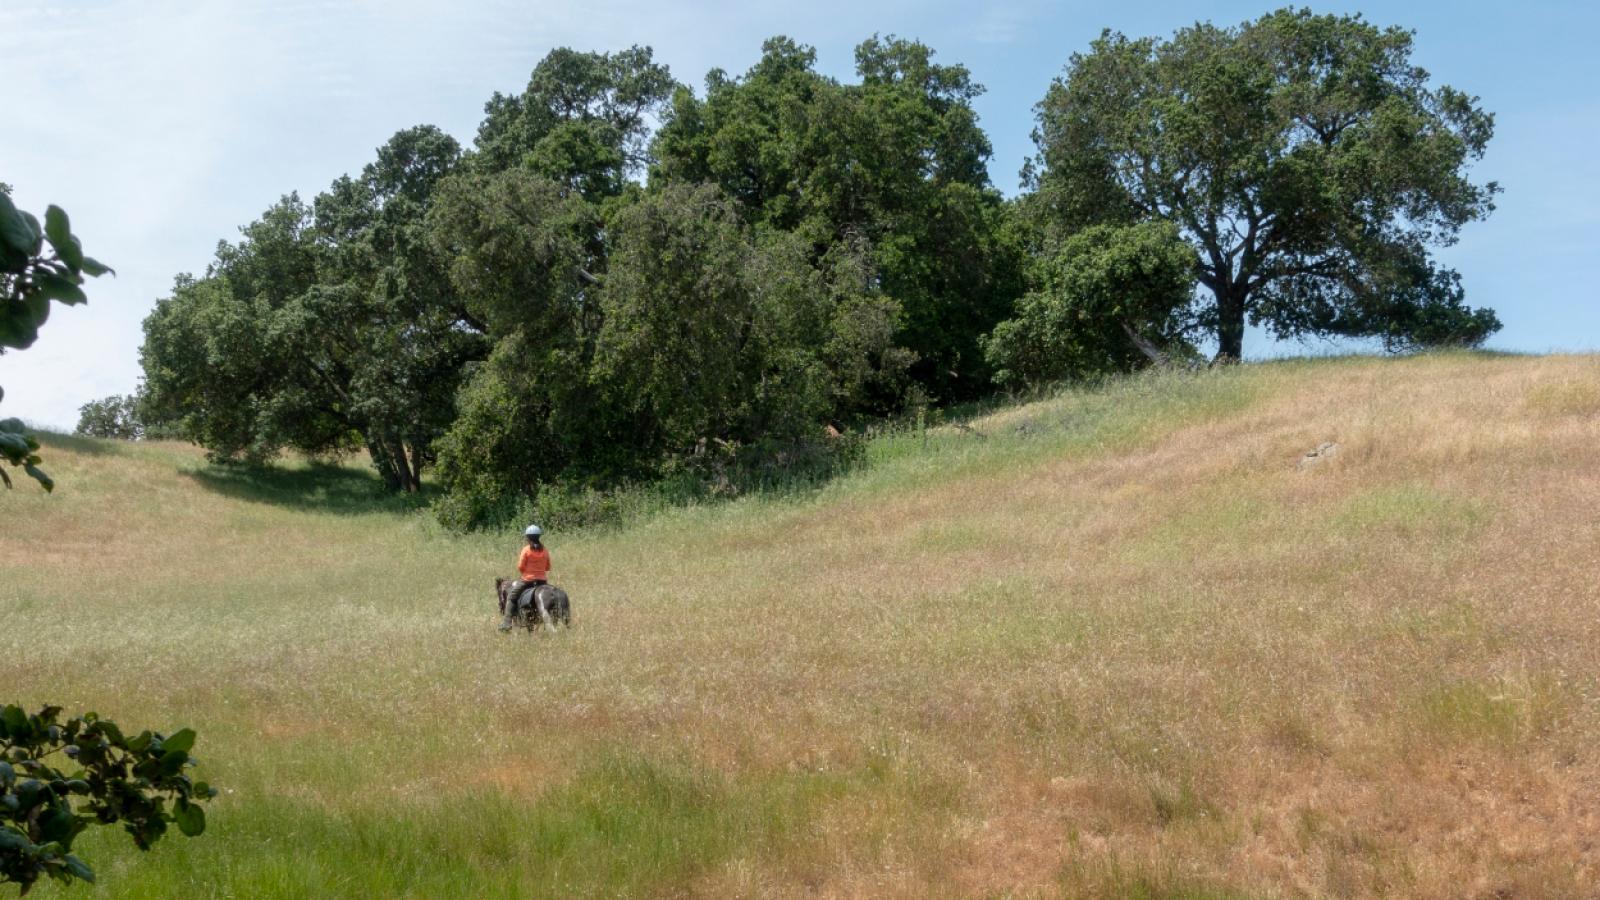 a rider and horse in a grassy meadow